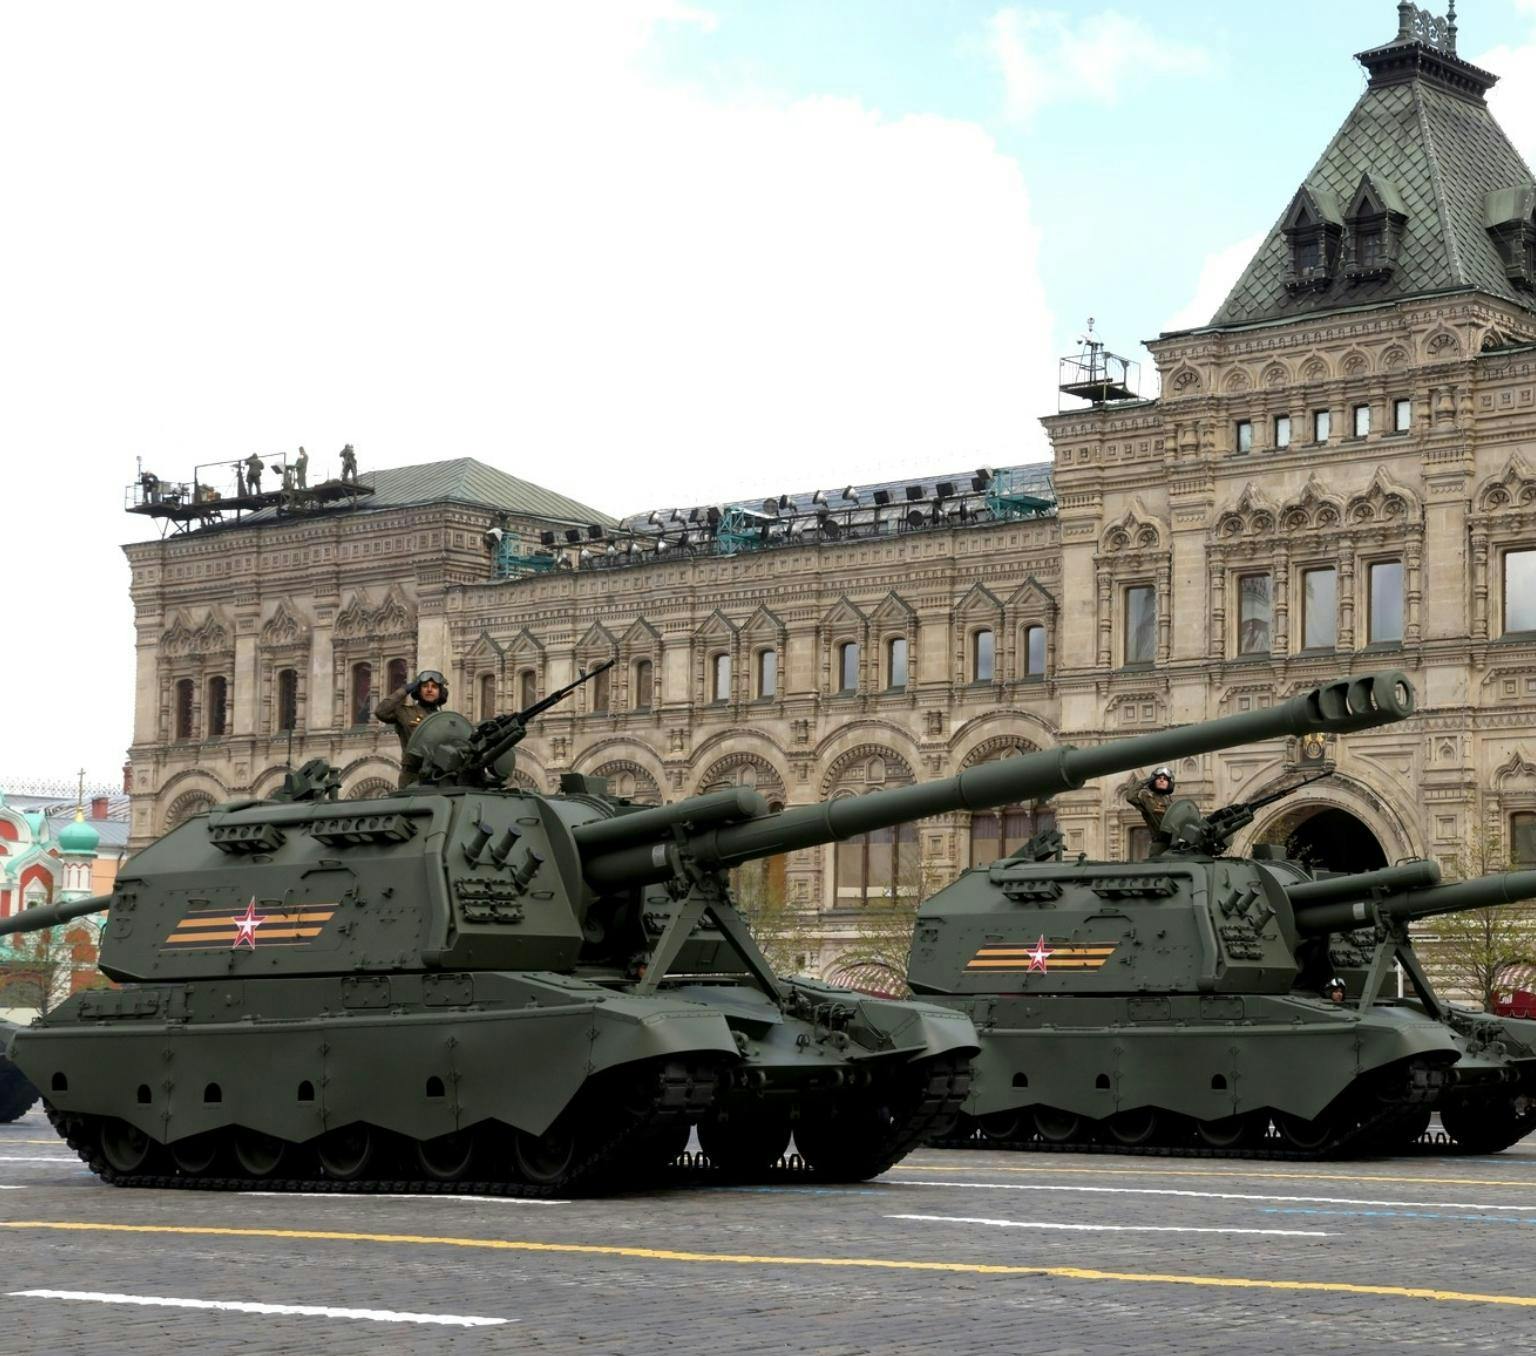 khaki coloured tanks are driving in front of a sandstone building